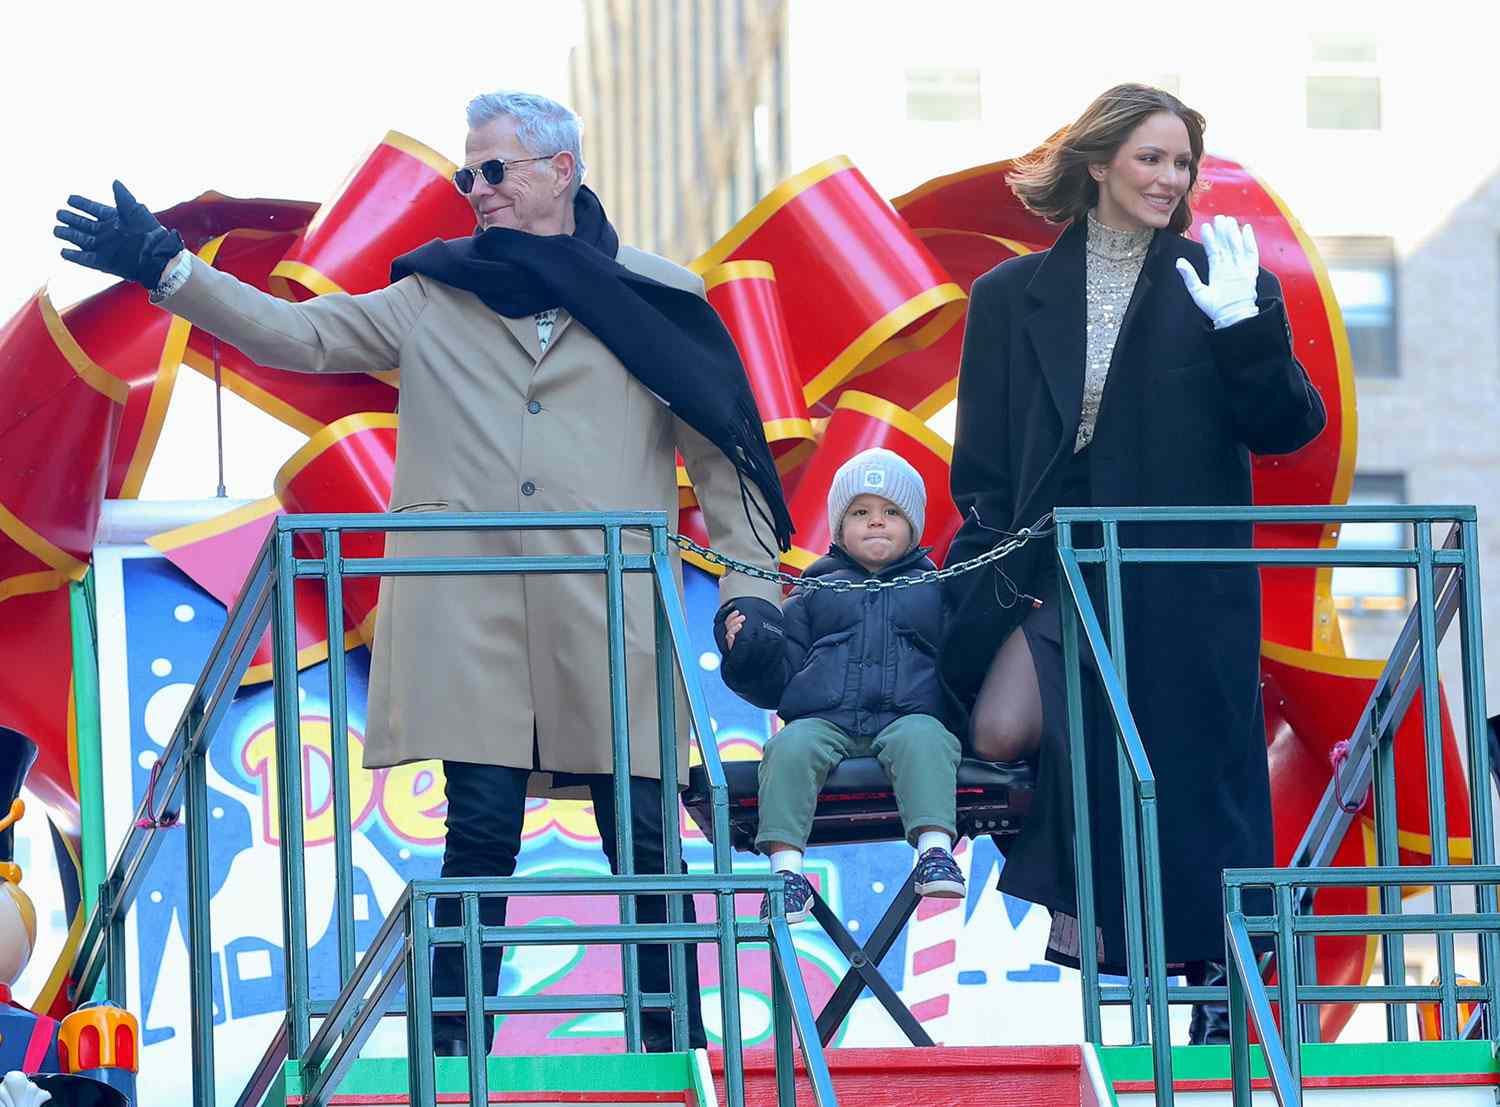 NEW YORK, NY - NOVEMBER 23: David Foster, Katharine McPhee and son Rennie Foster are seen at the 2023 Macy's Thanksgiving Day Parade on November 23, 2023 in New York City.